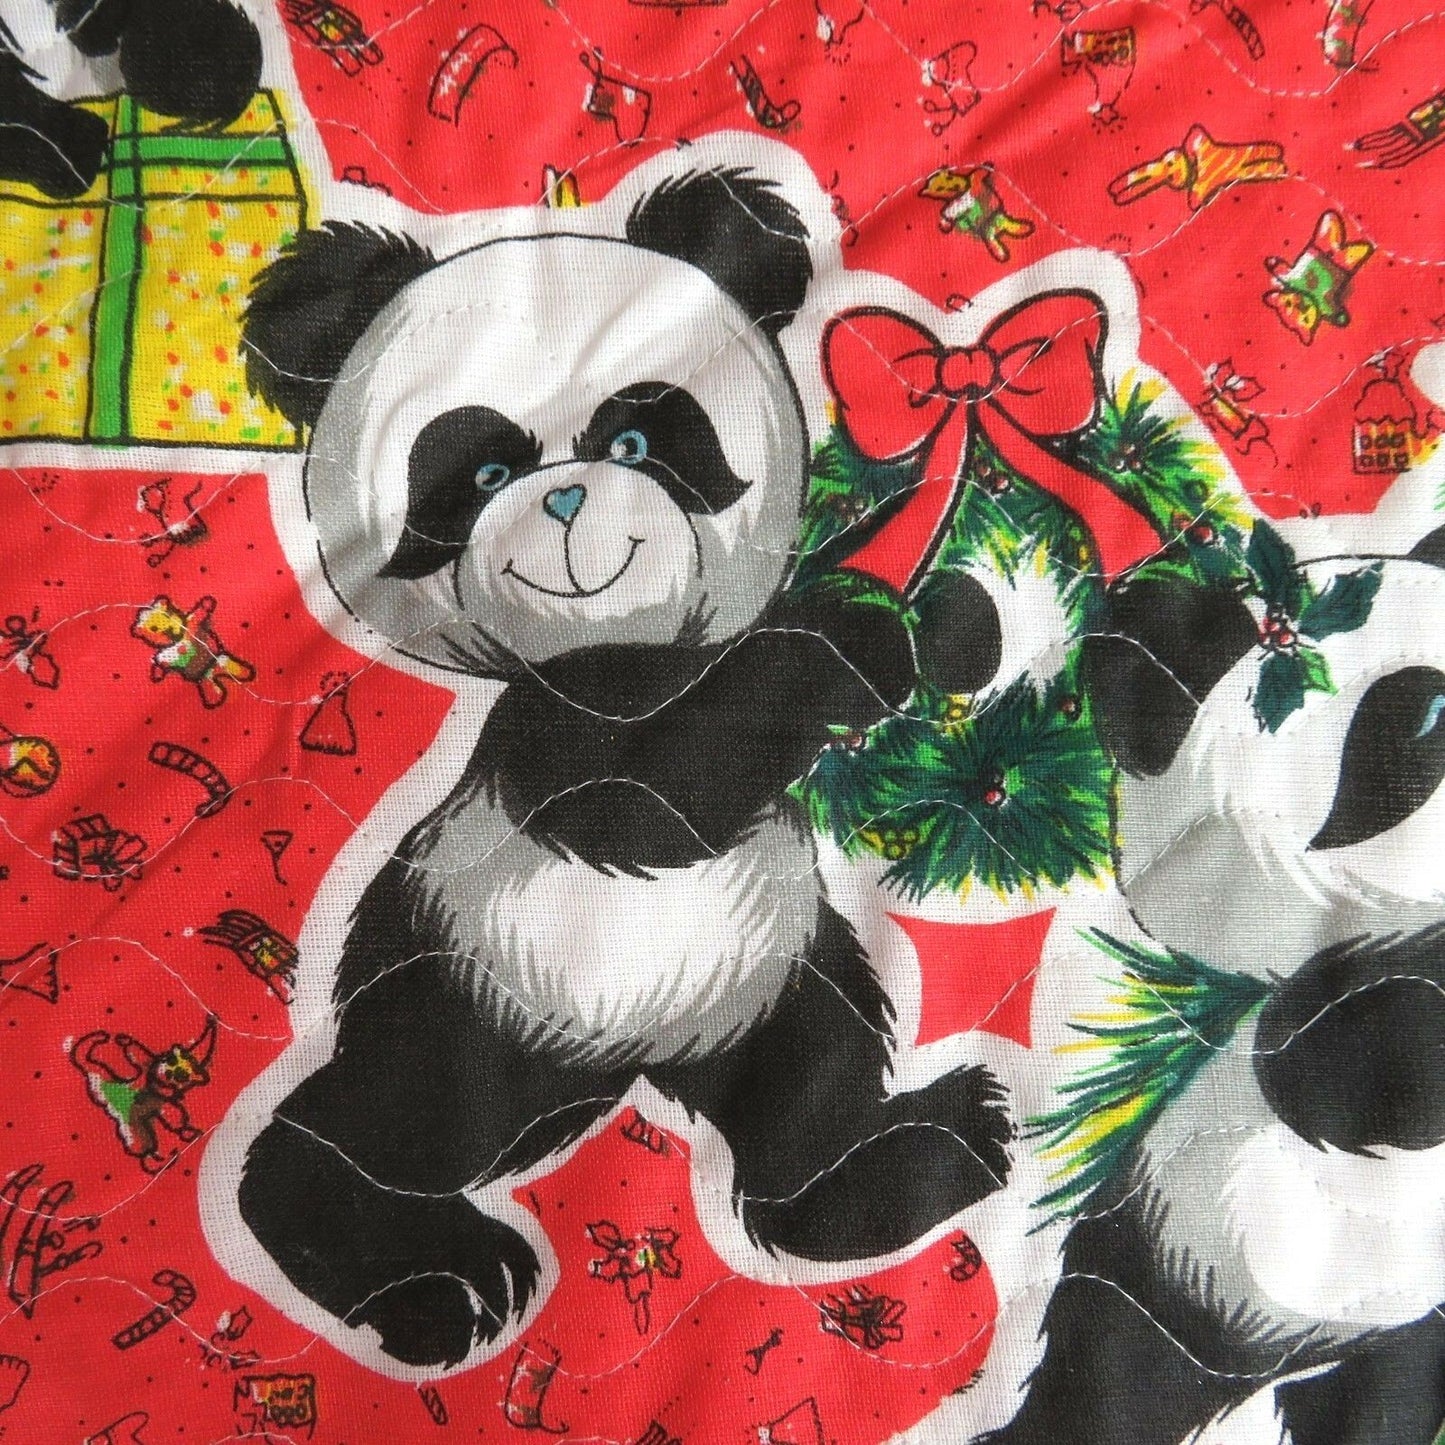 Vintage Panda Bear Christmas Tree Skirt Red Quilted Printed Red Green - At Grandma's Table